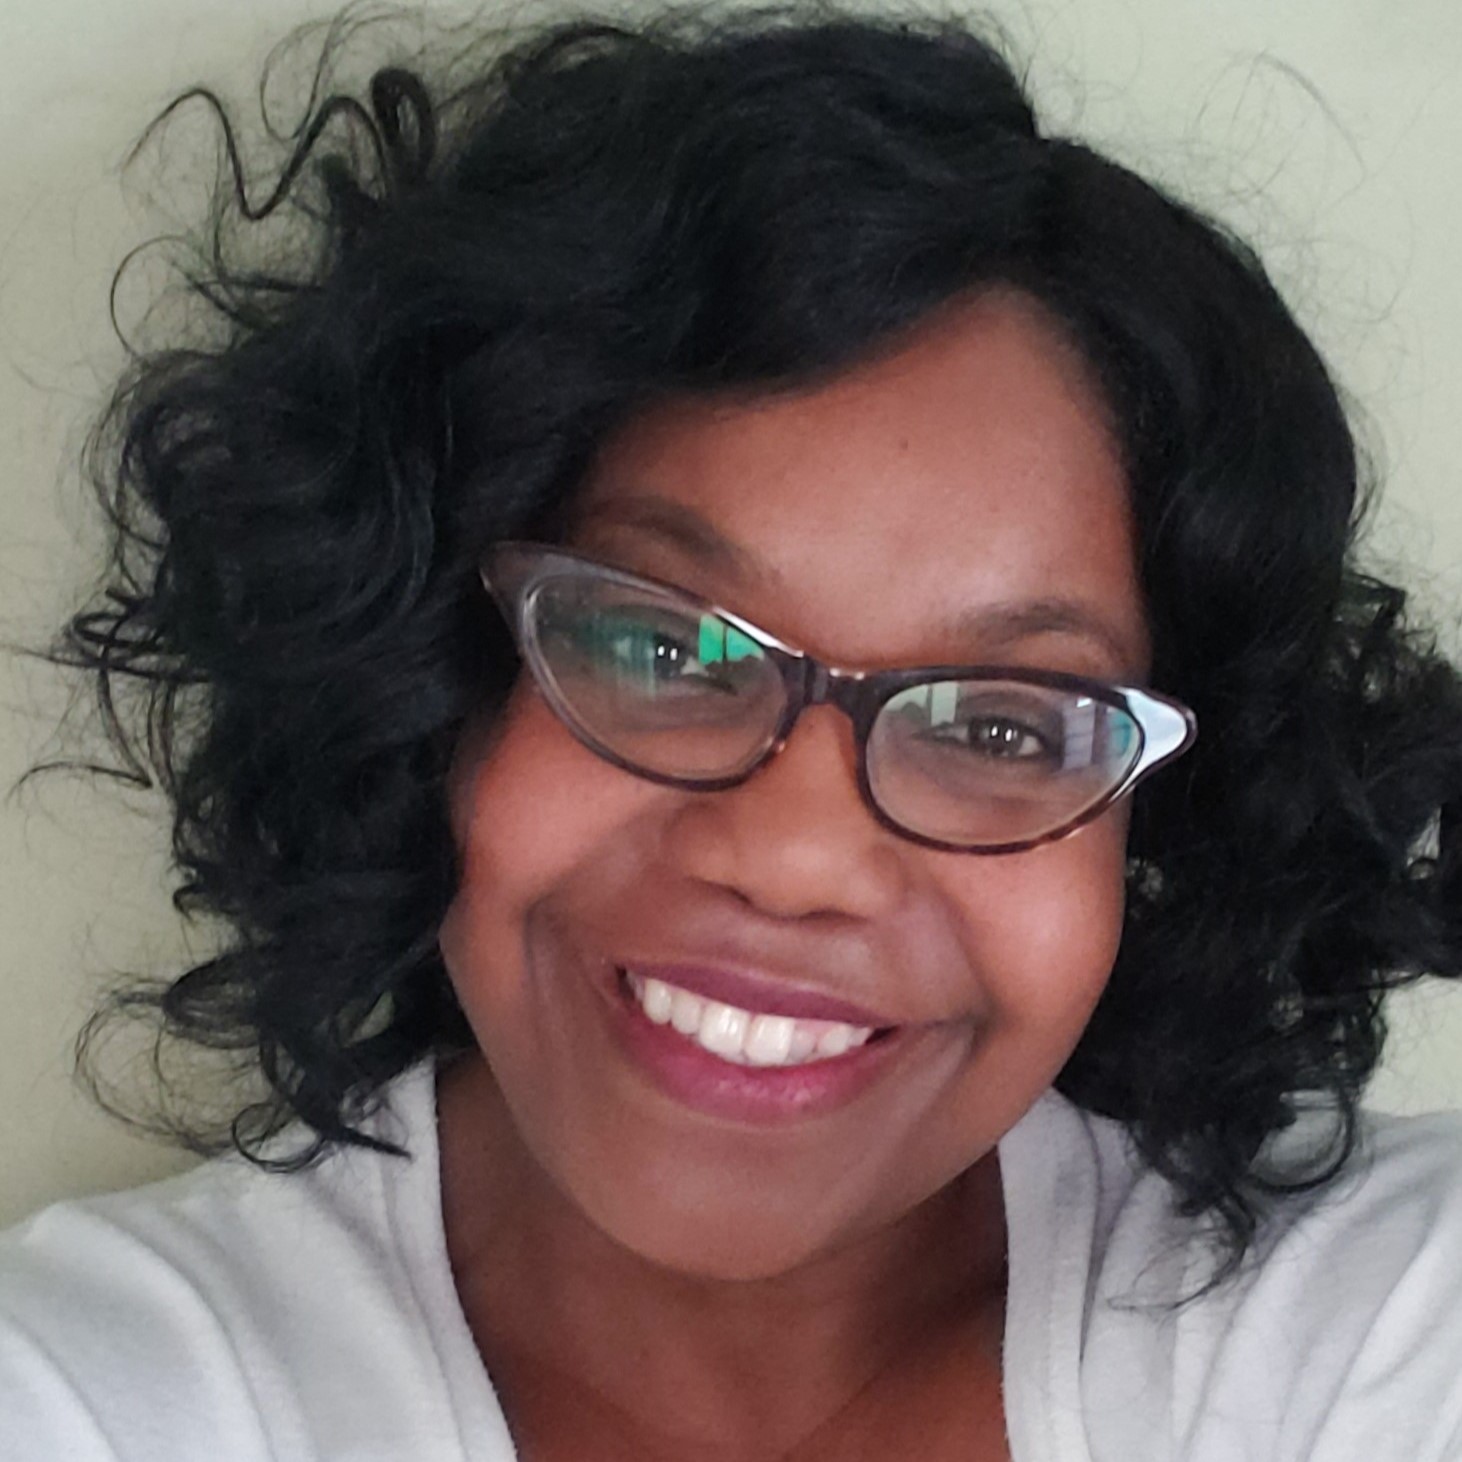 Headshot of Cory, a Black Indigenous woman with short curly black hair, glasses, and a white top smiling at the camera in front of an off-white wall